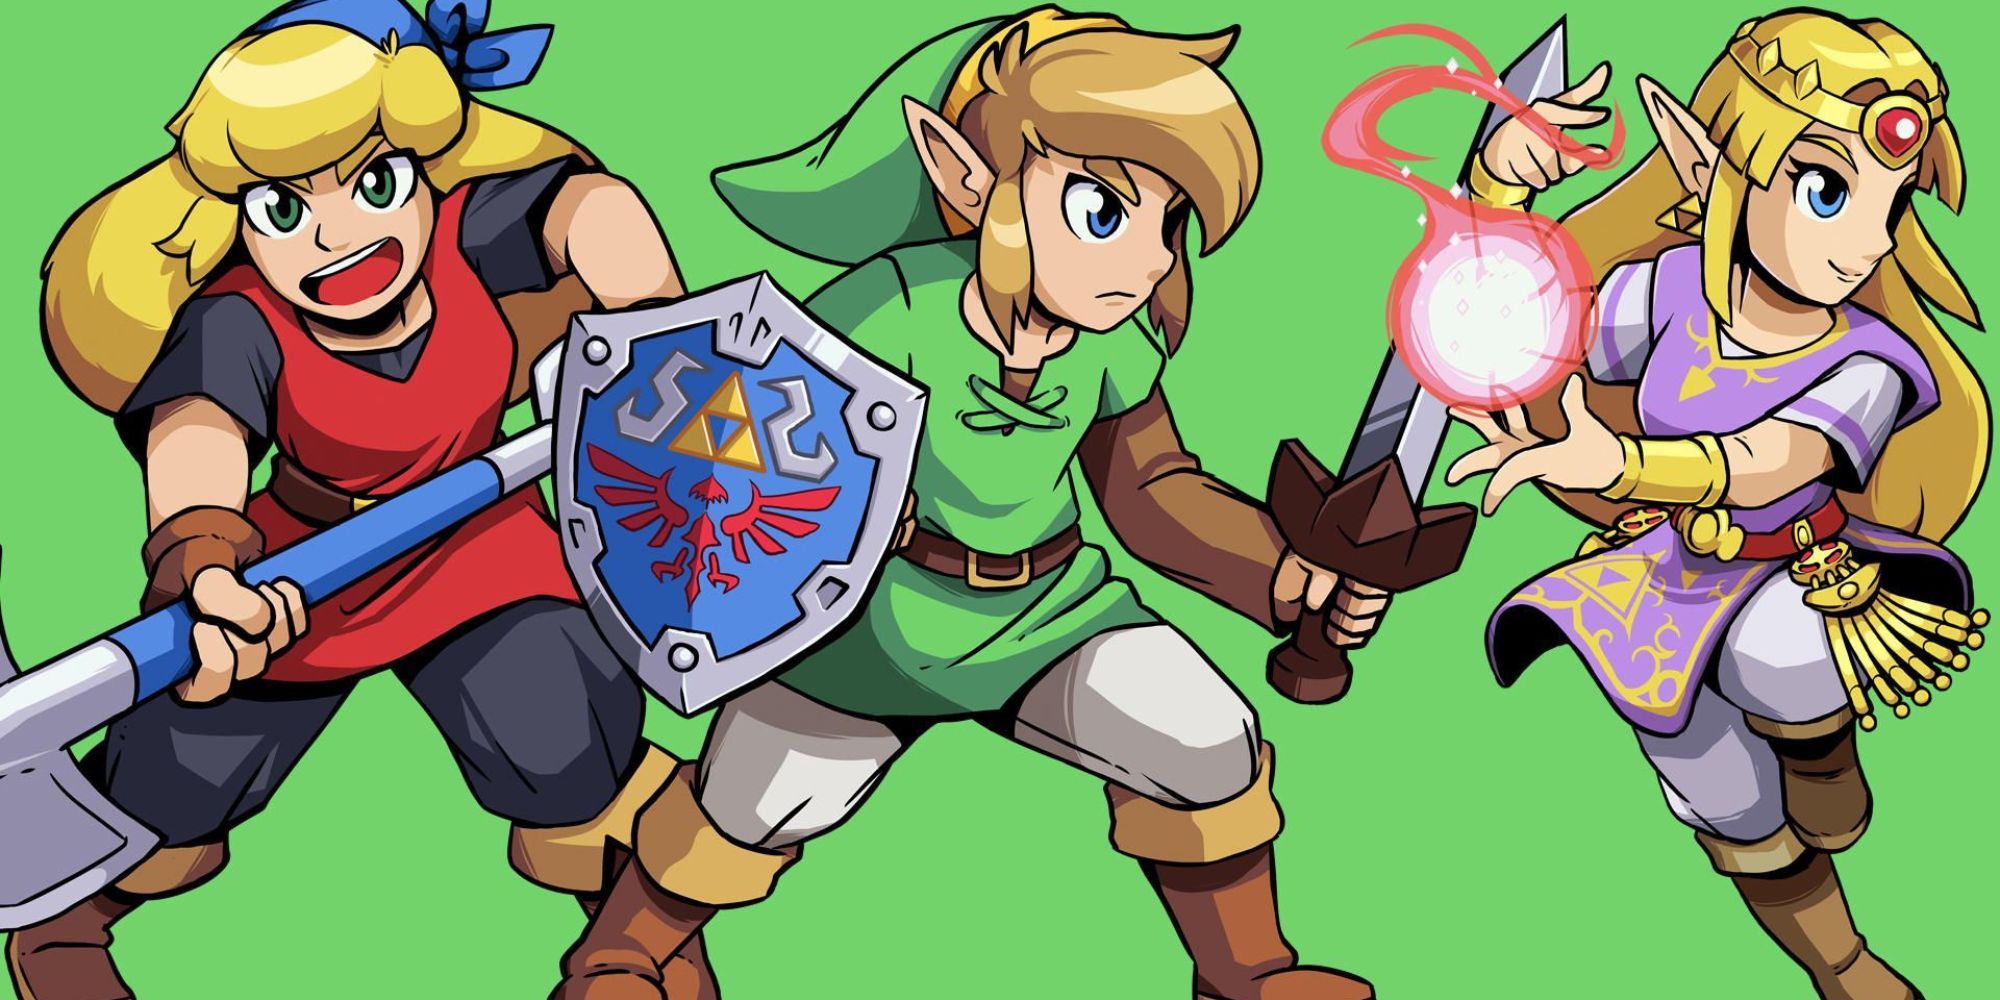 Cadence, Link, and Zelda pose in front of a green background